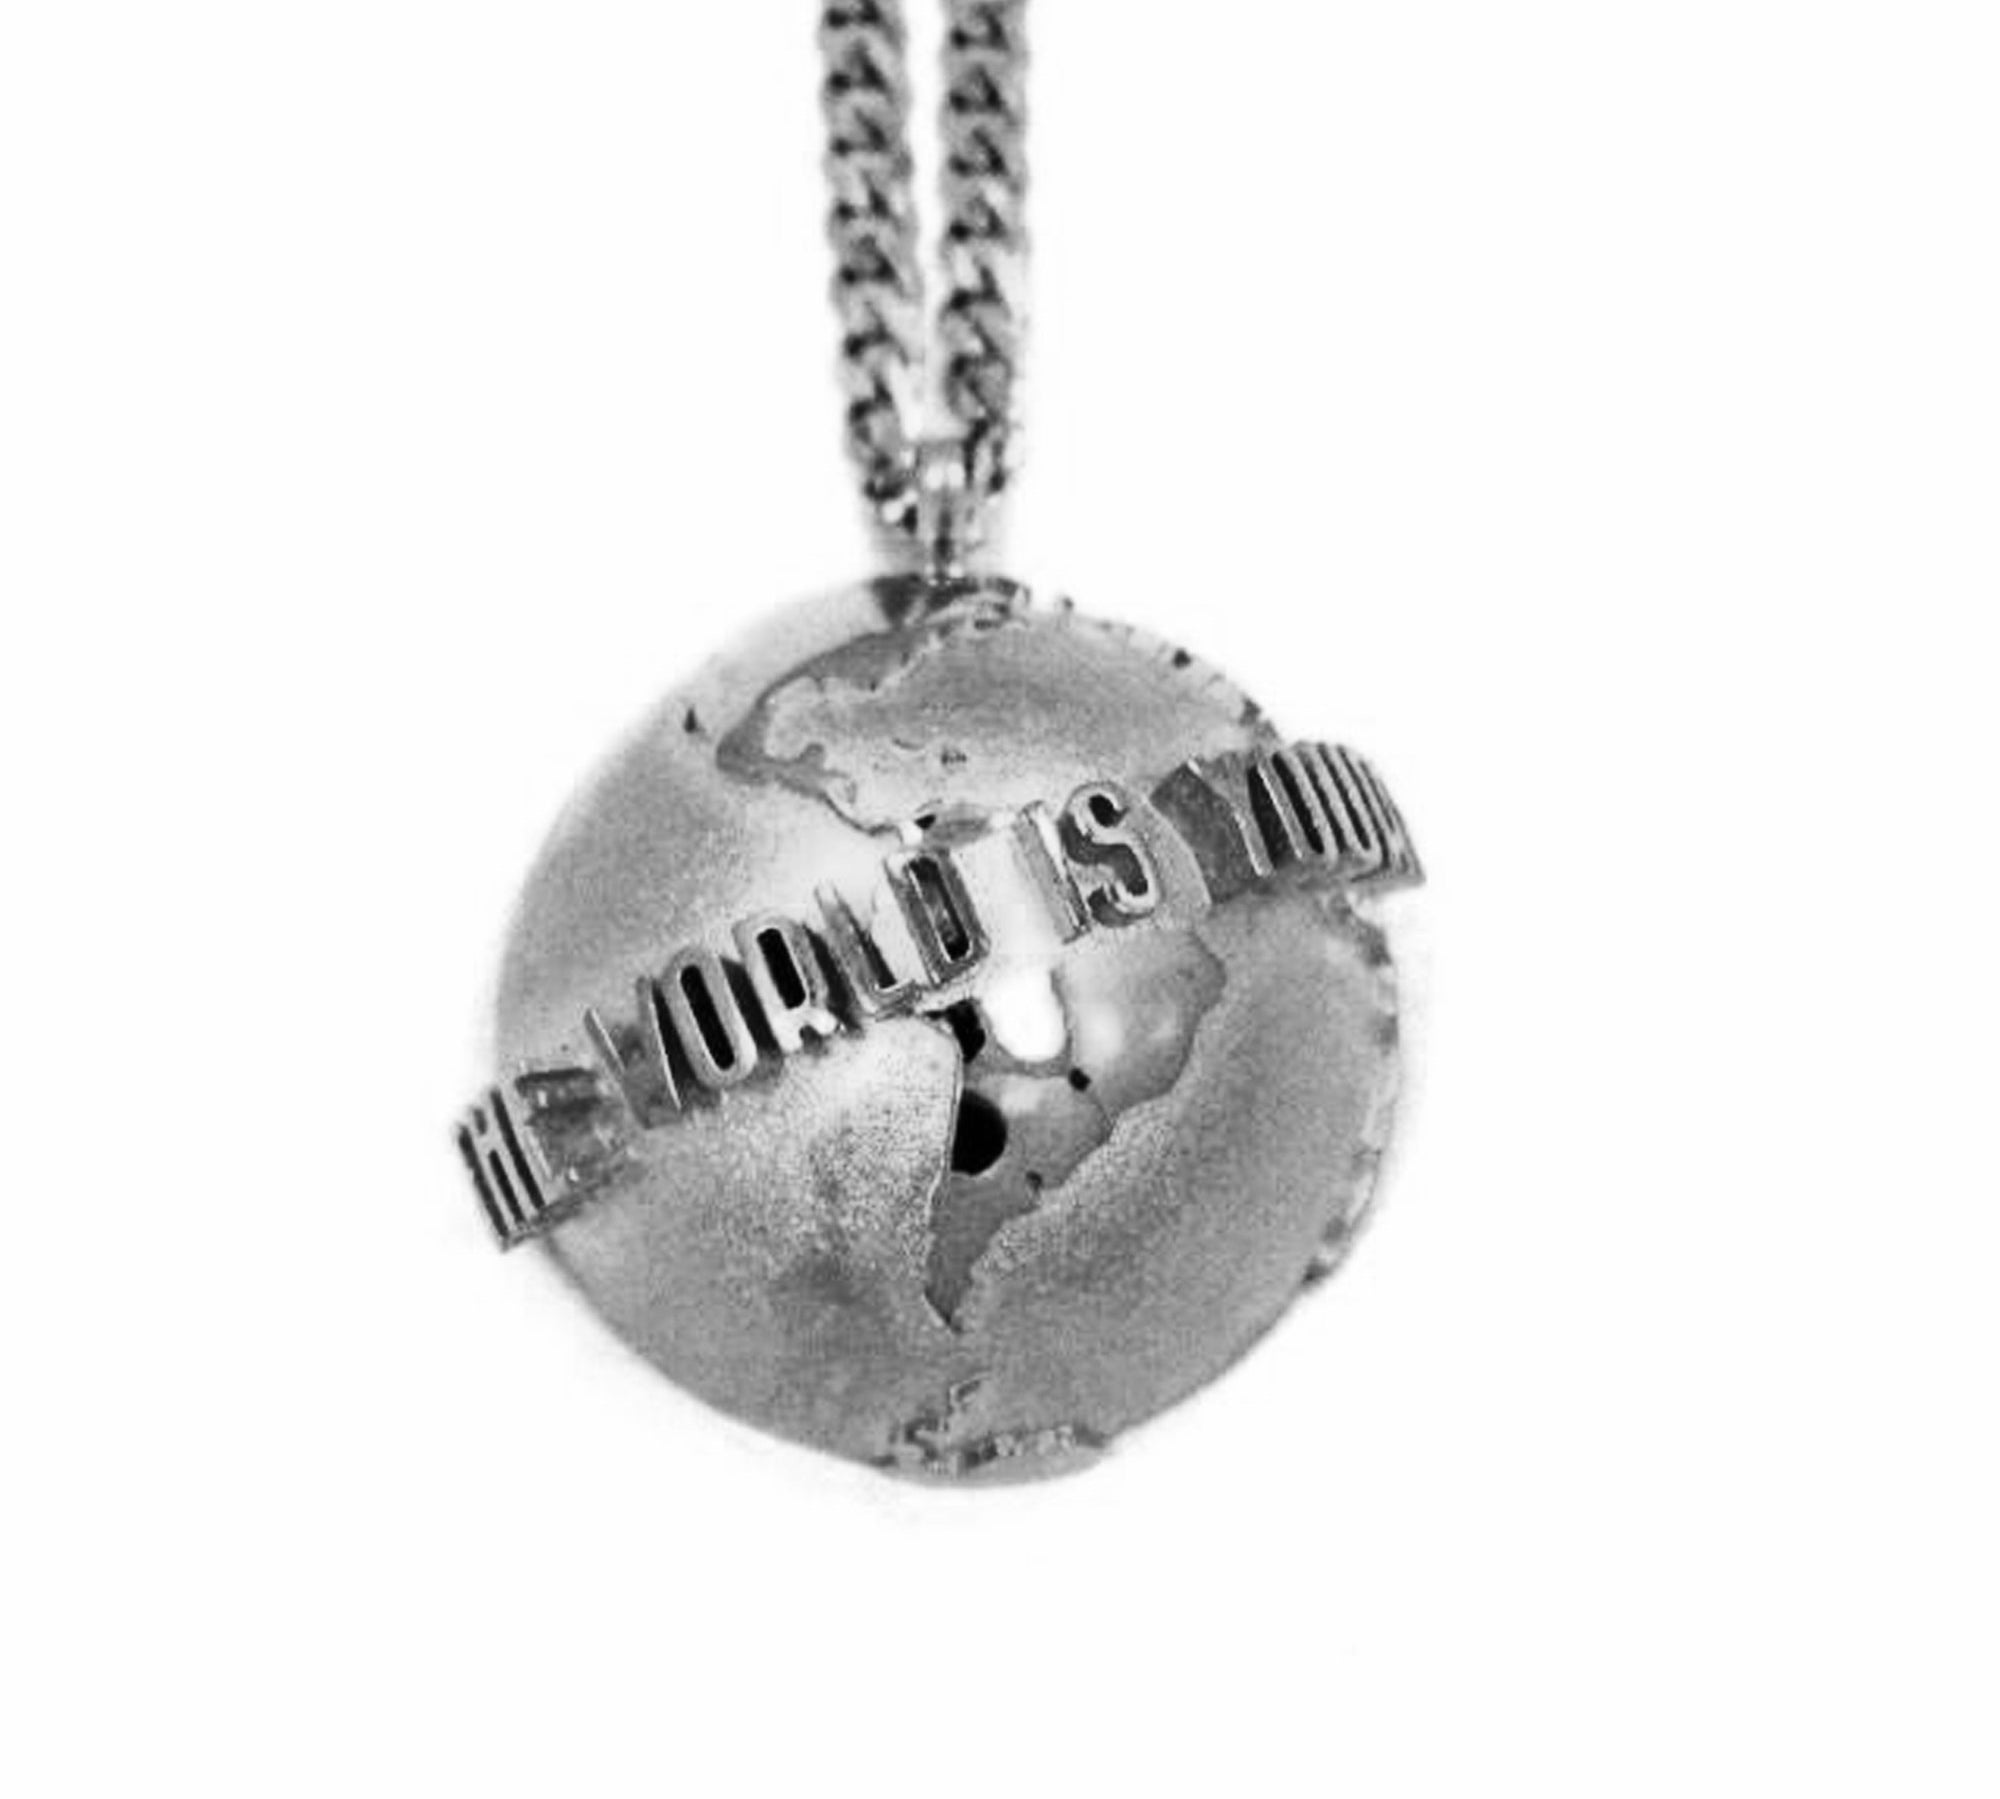 The World is Yours Pendant pm necklaces Precious Metals Sterling Silver .925 24" 